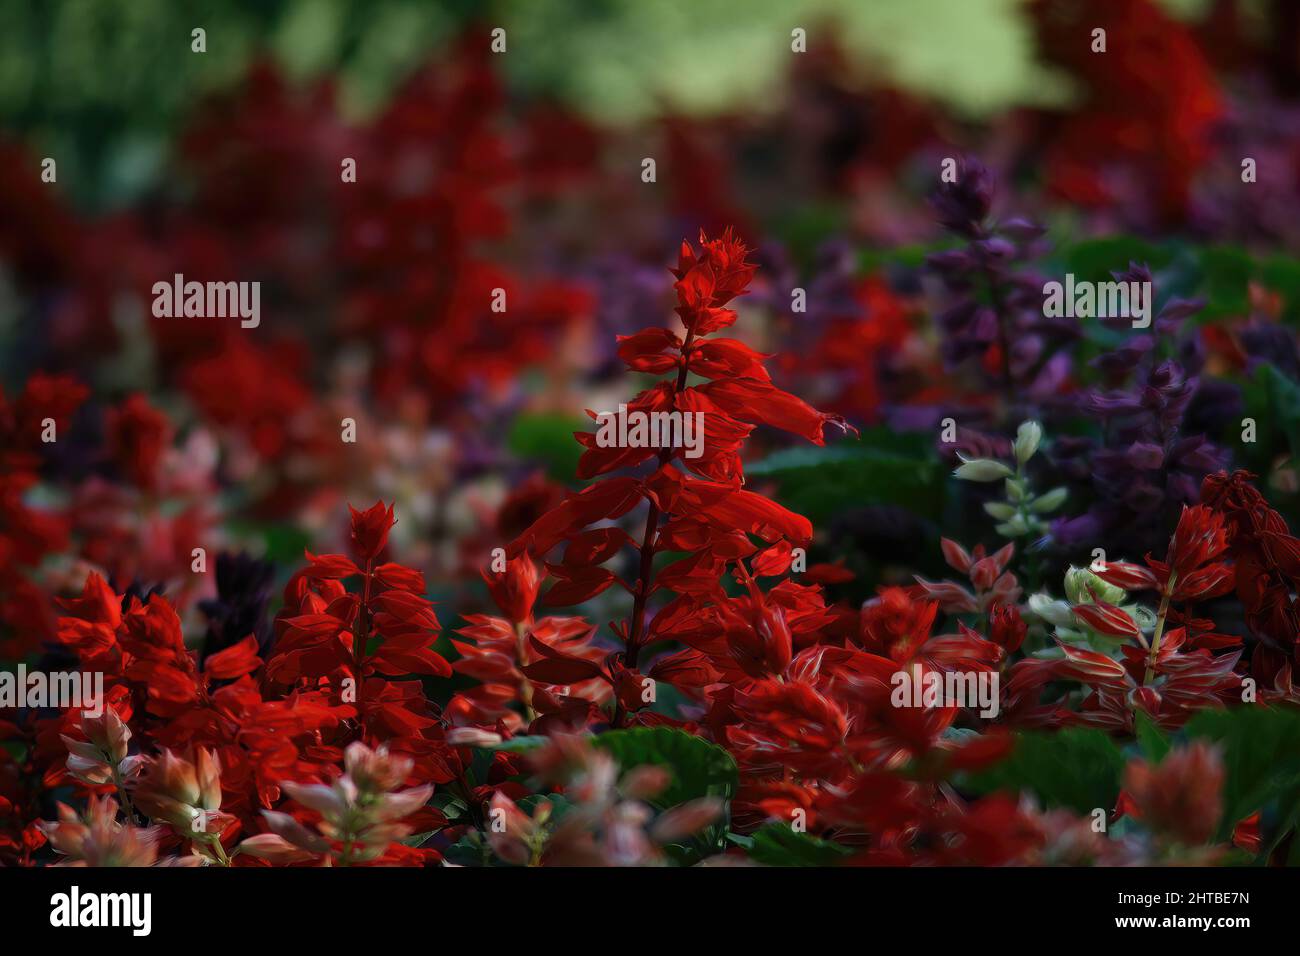 Close-up shot of scarlet sage growing in the garden on a blurred background Stock Photo